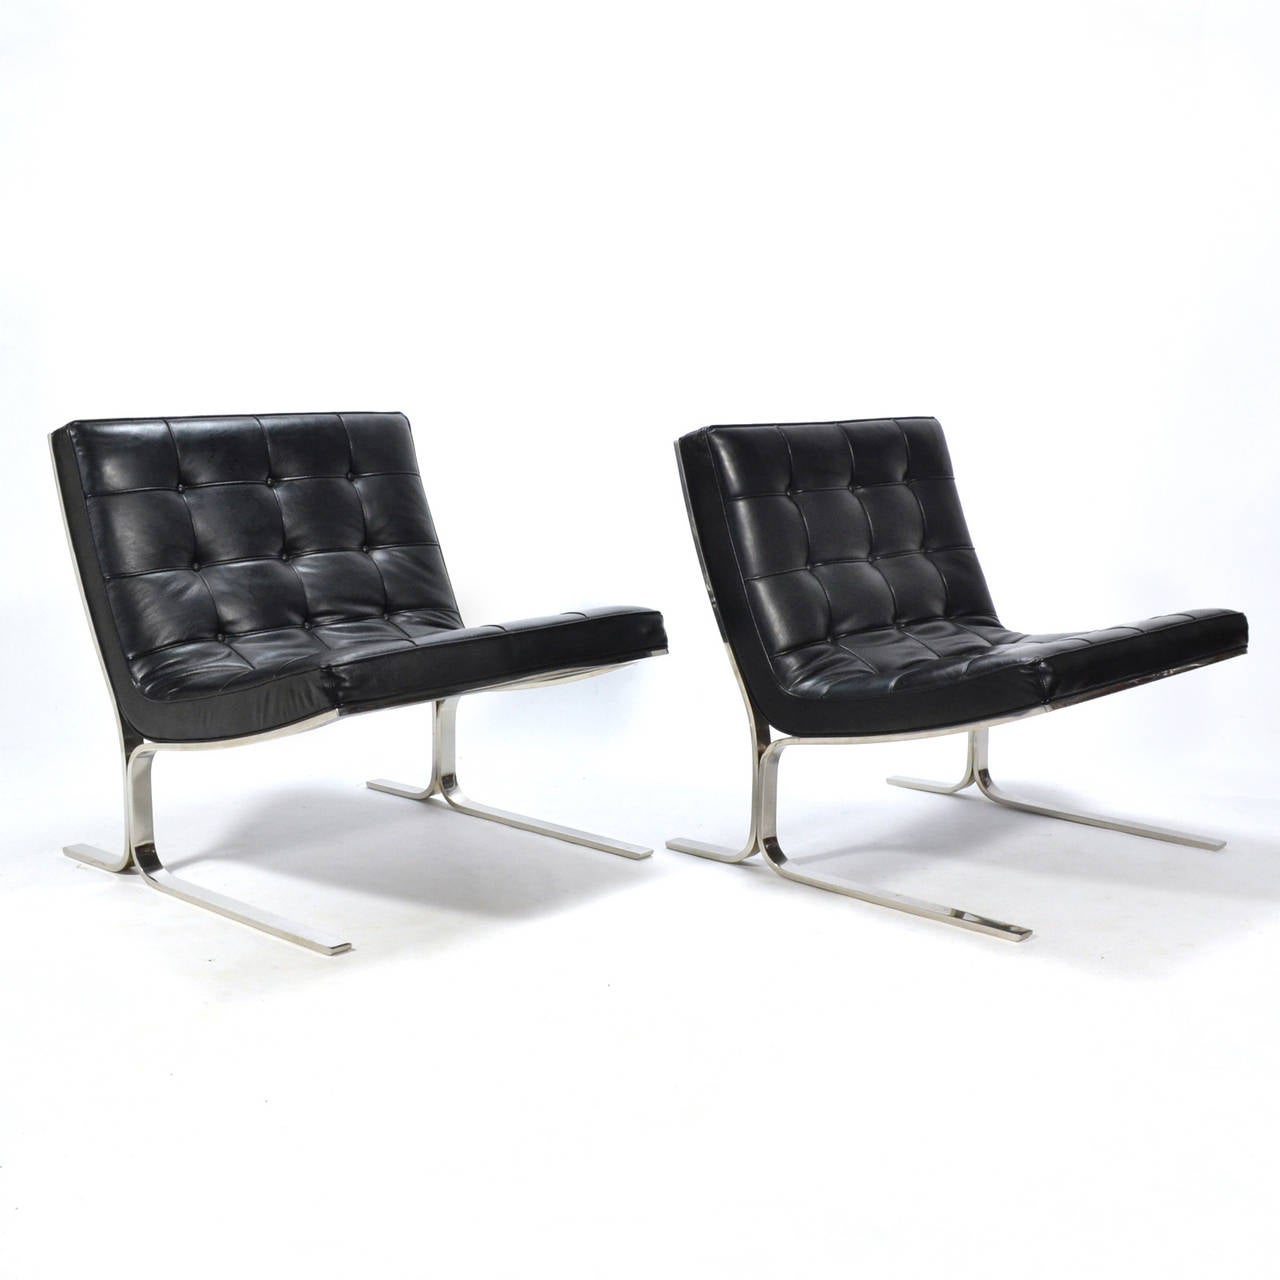 Leather Nicos Zographos Pair of Lounge Chairs For Sale